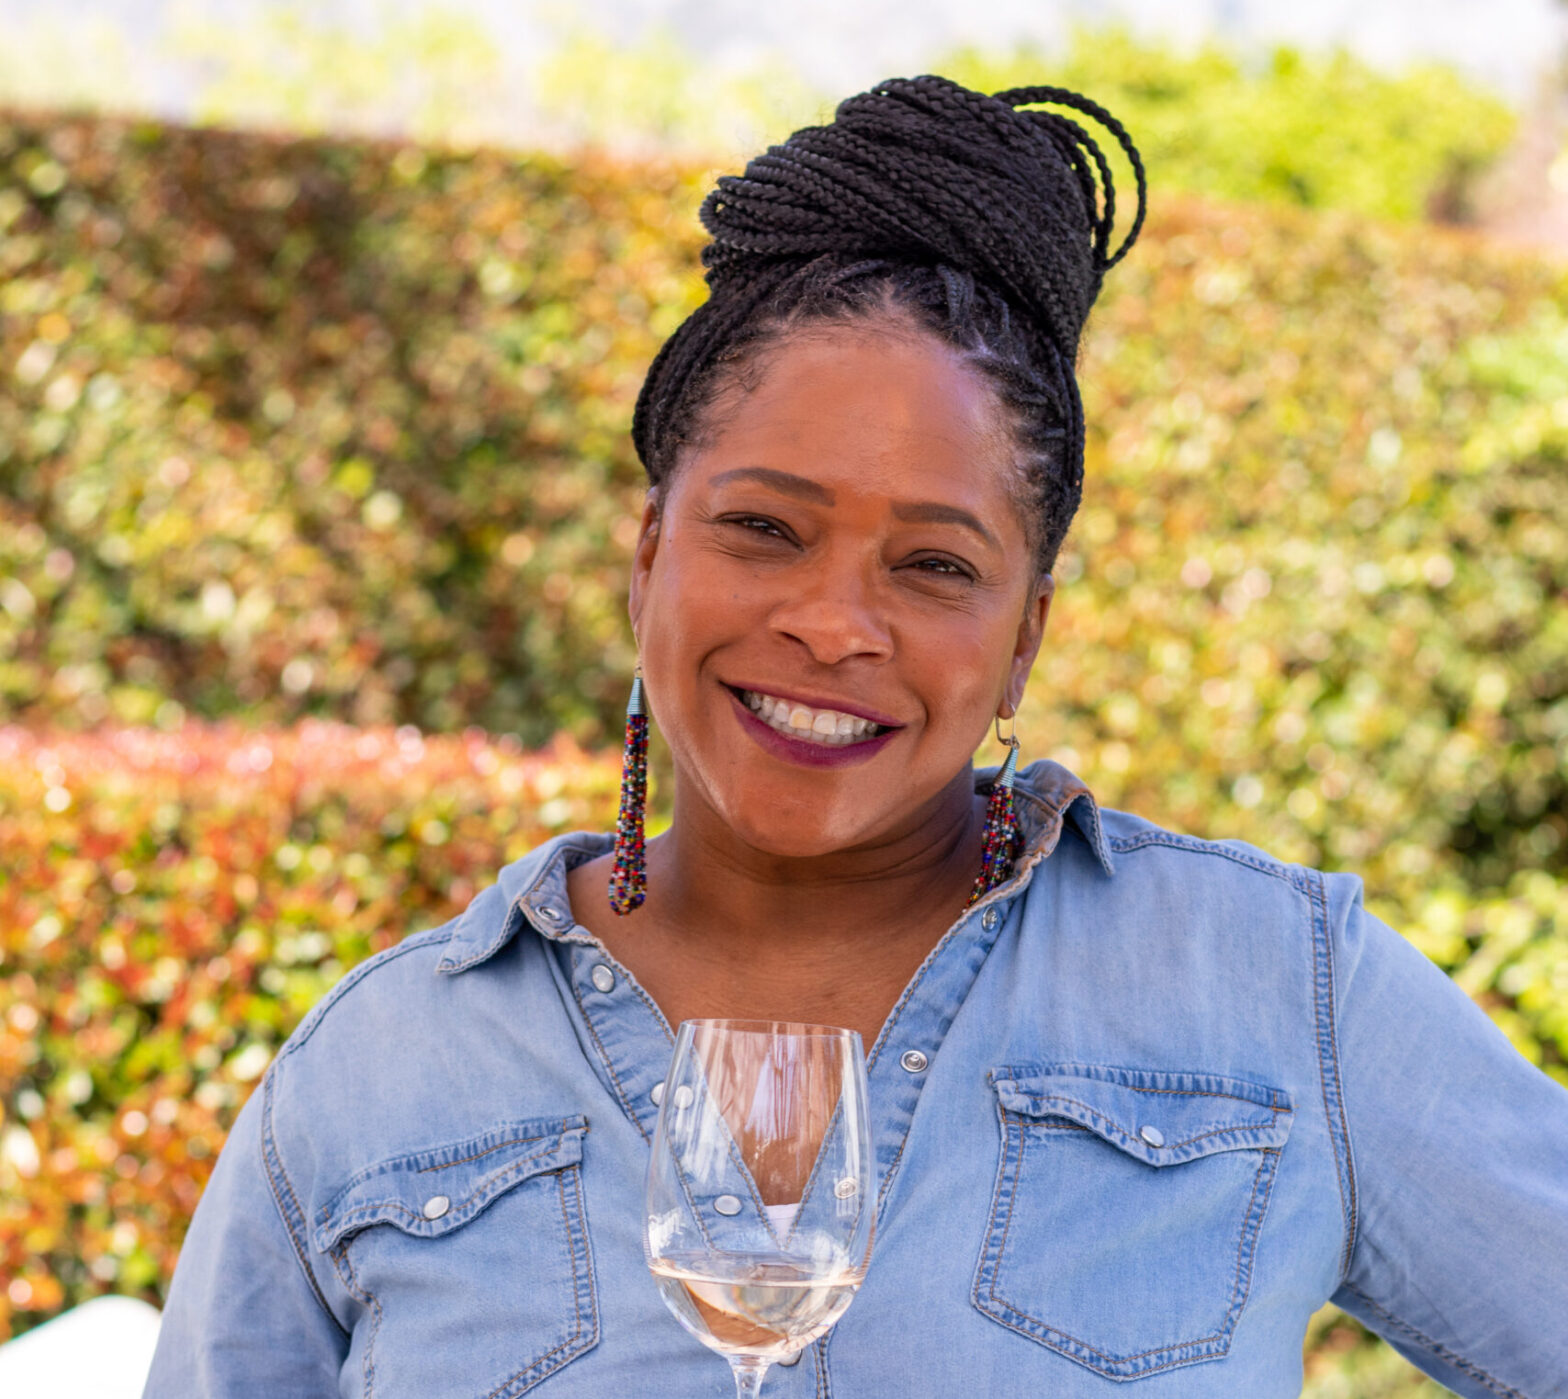 Woman-owned Wine Tasting Educates Travelers in South Africa